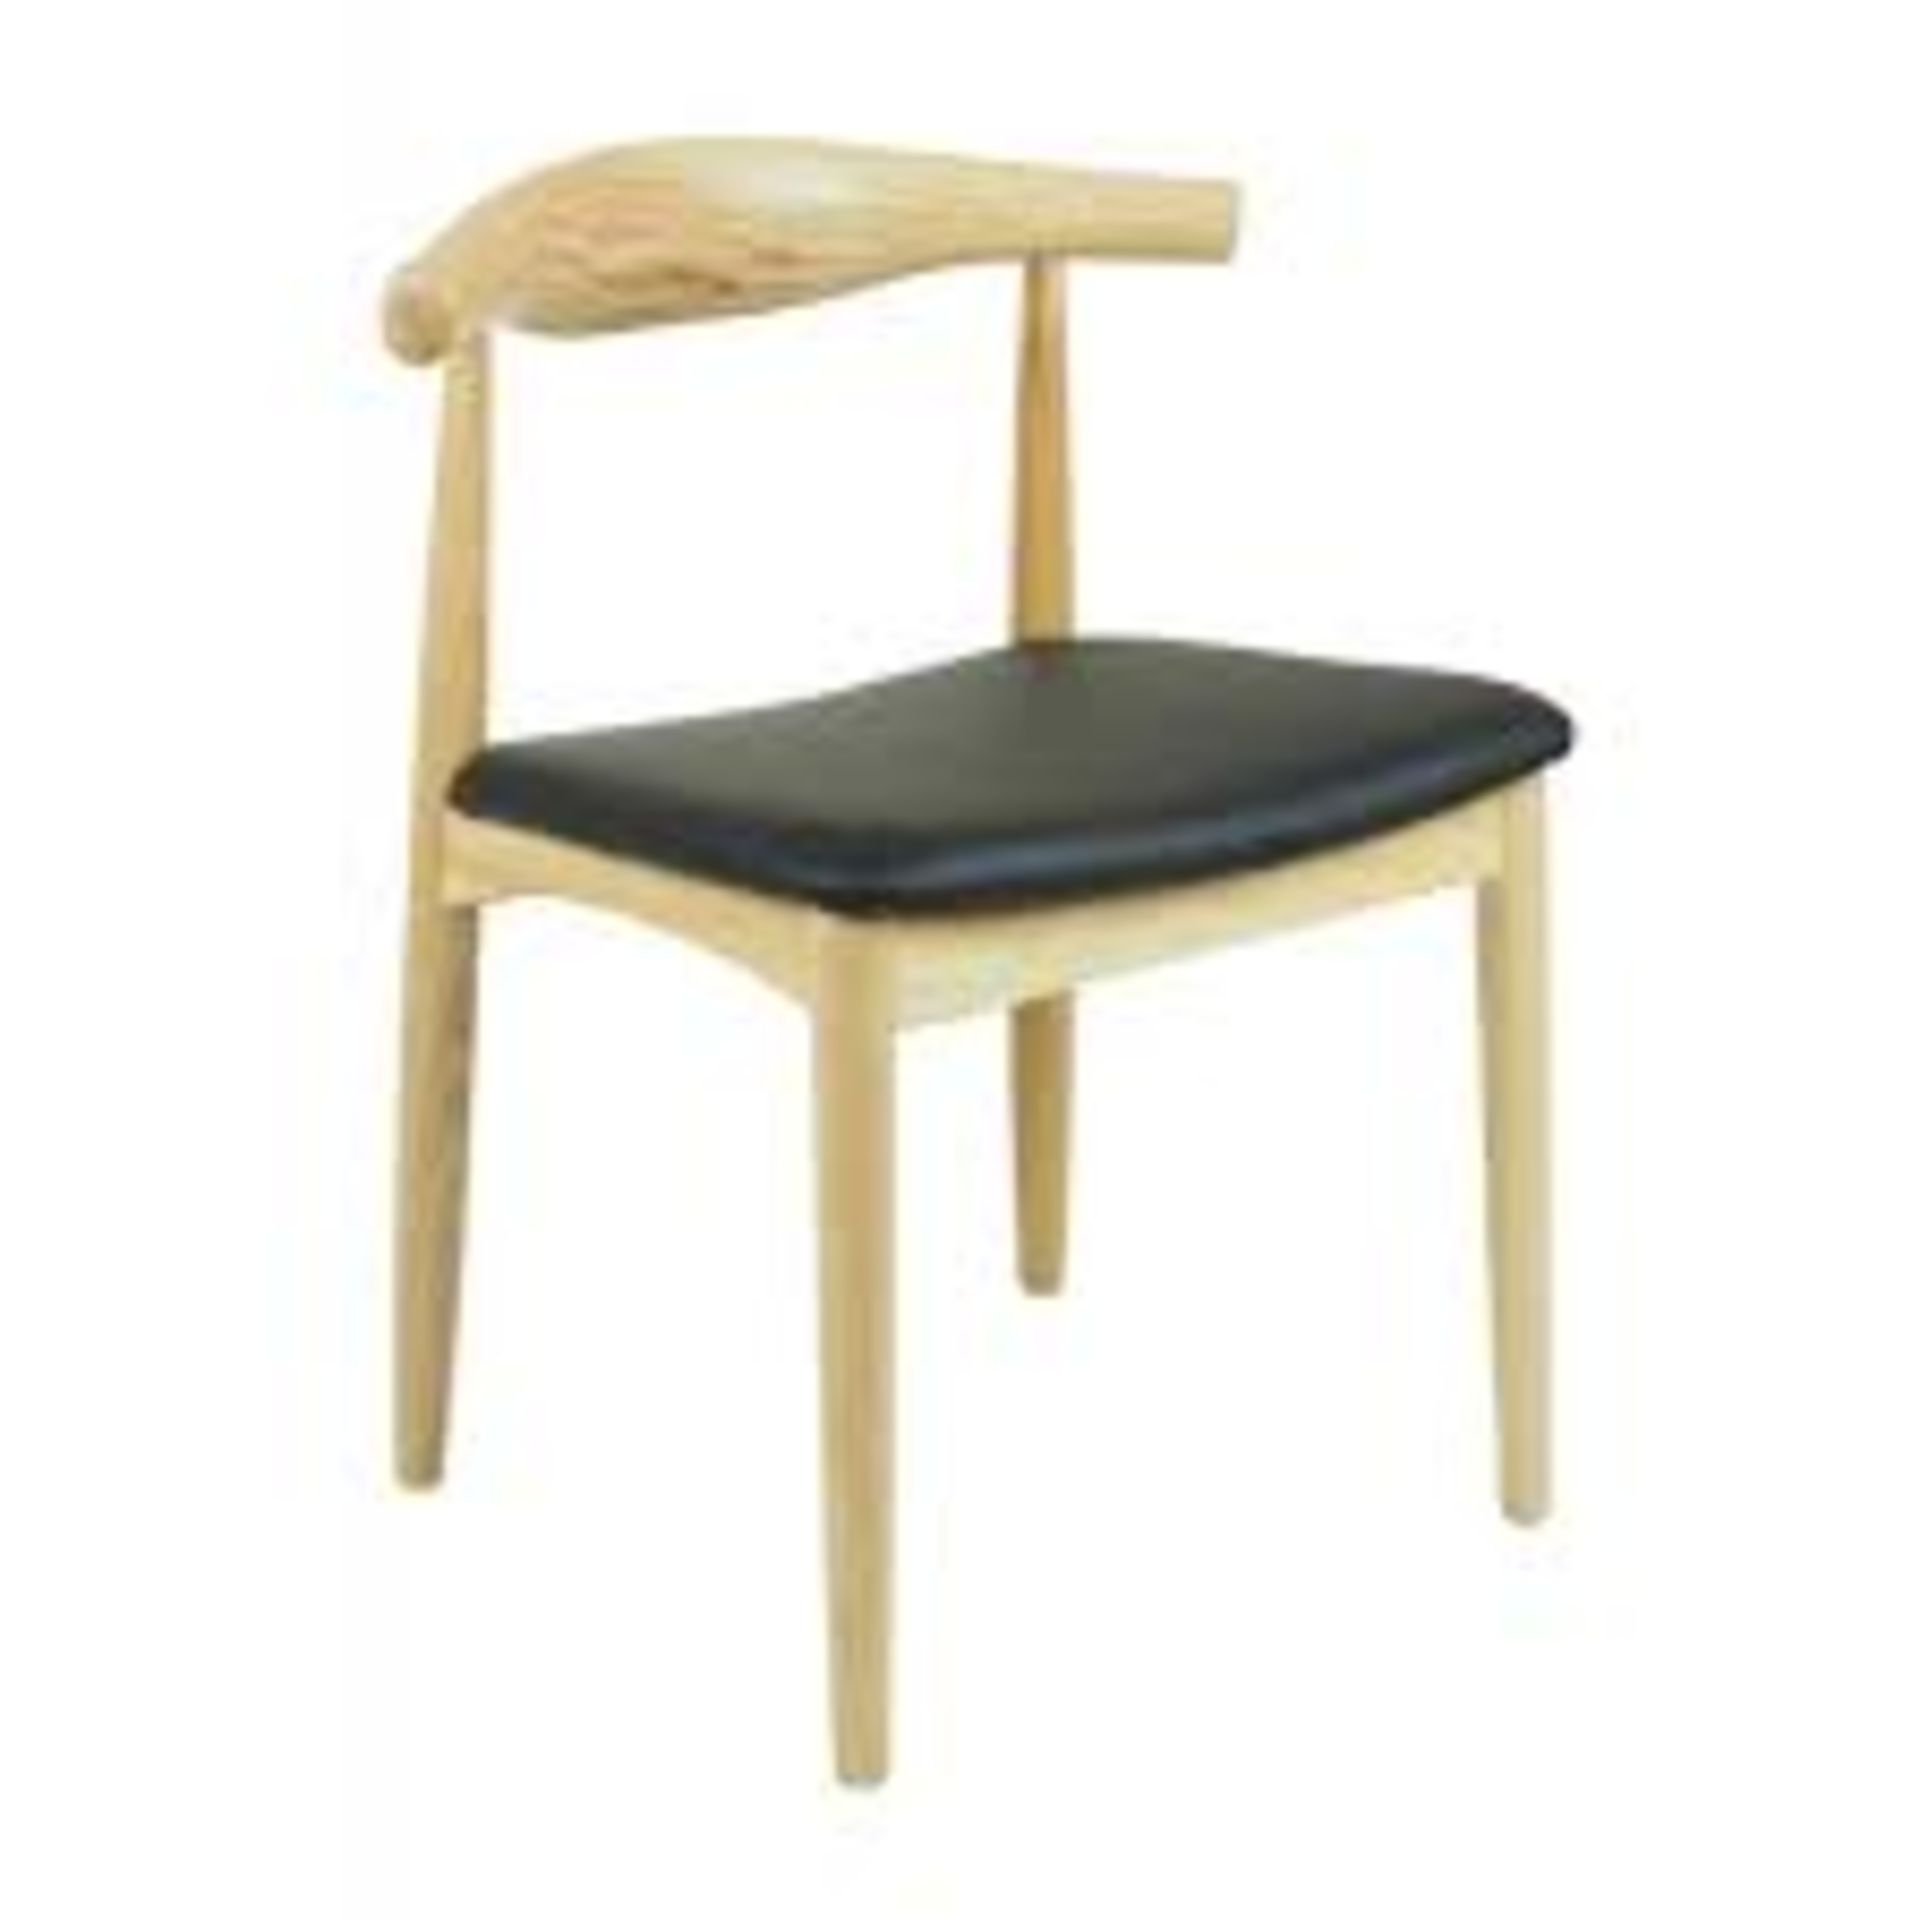 4 x Hans Wegner Inspired Elbow Chair - Solid Wood With Light Stain Ash Finish And Black Seat Pad - - Image 6 of 7